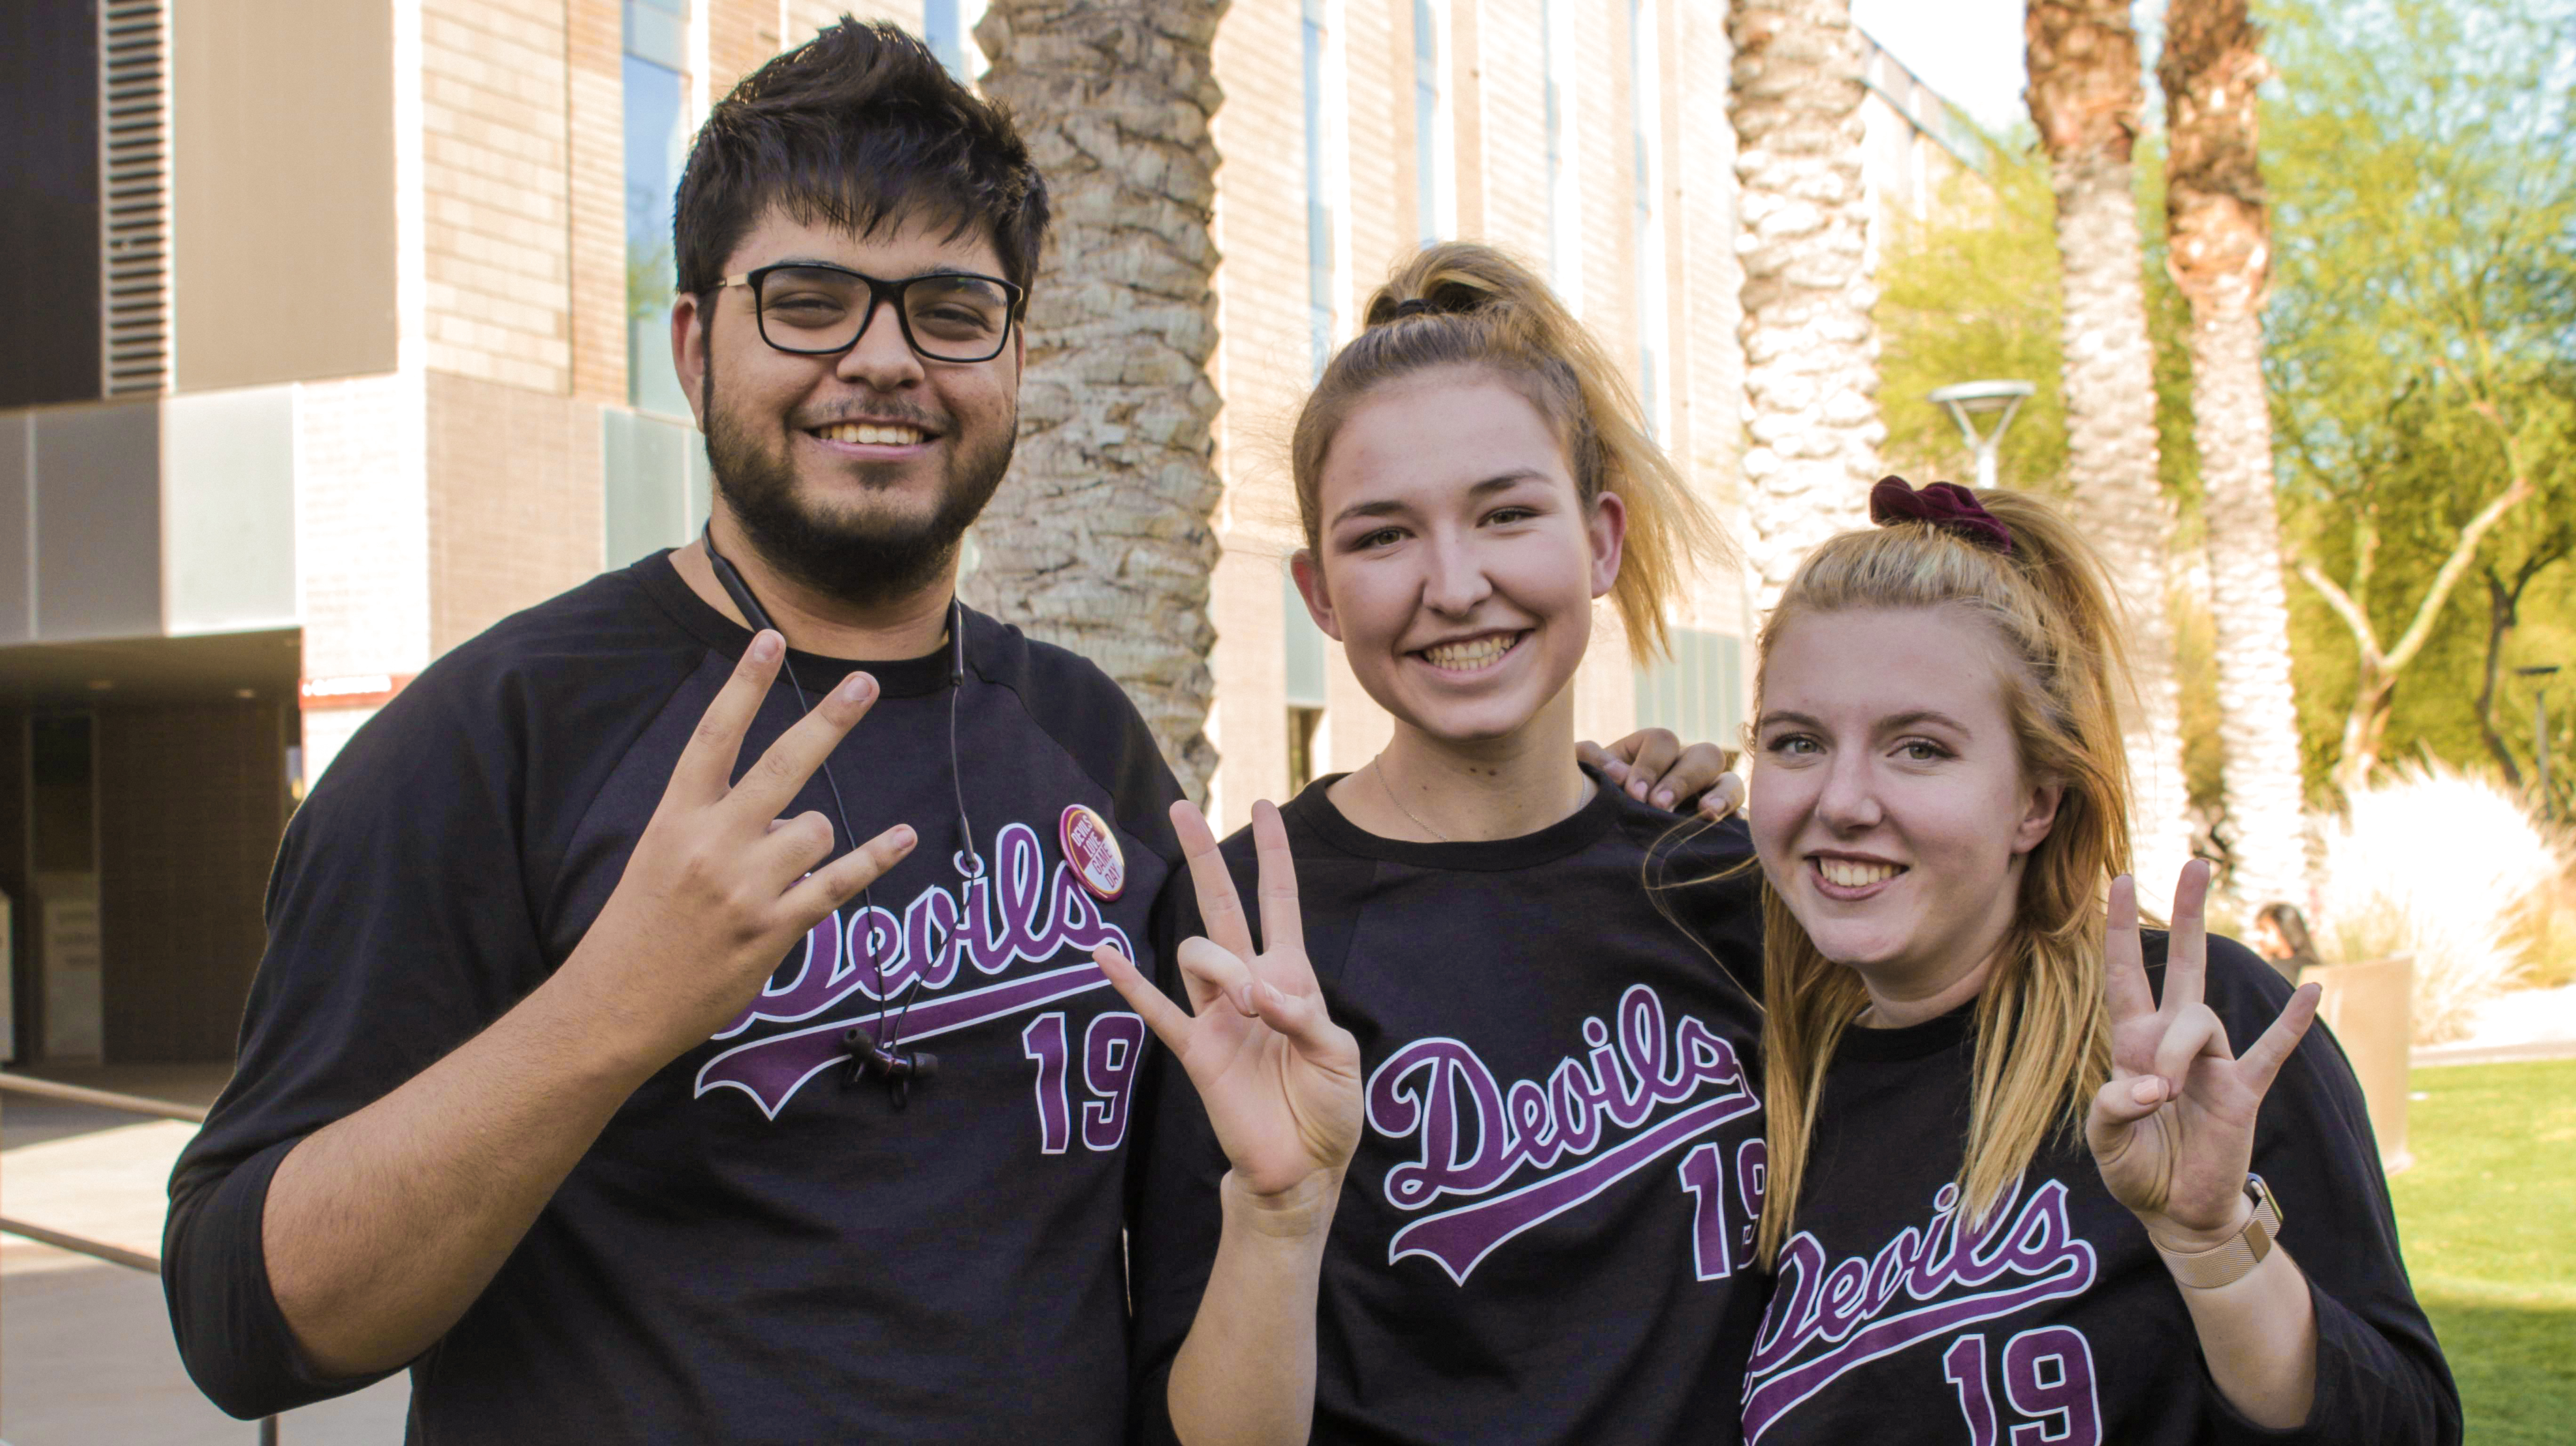 ASU students in baseball jerseys giving a forks up sign before the U of A games